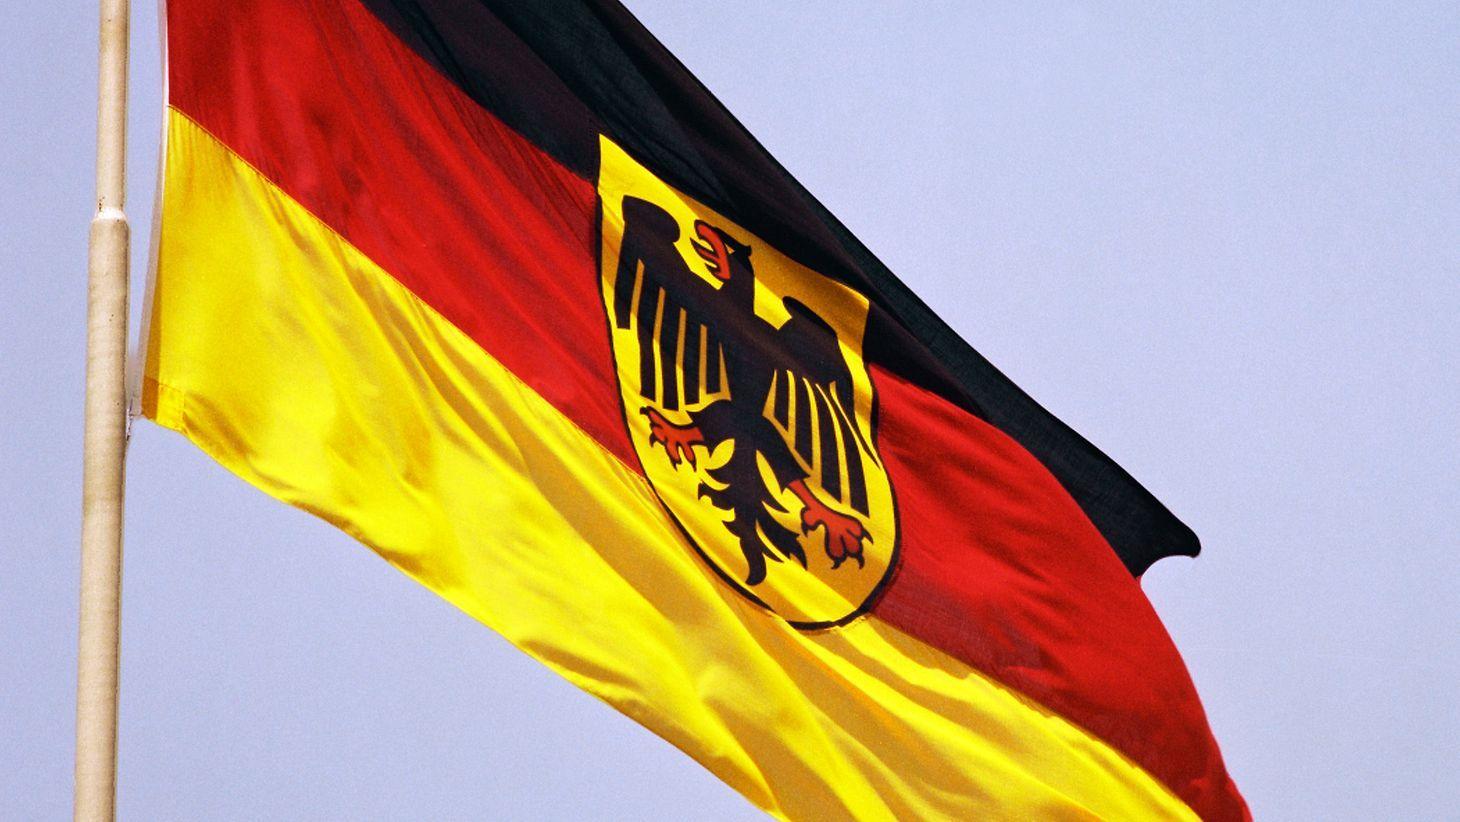 Red and Yellow Eagle Logo - German Bundestag - The federal eagle